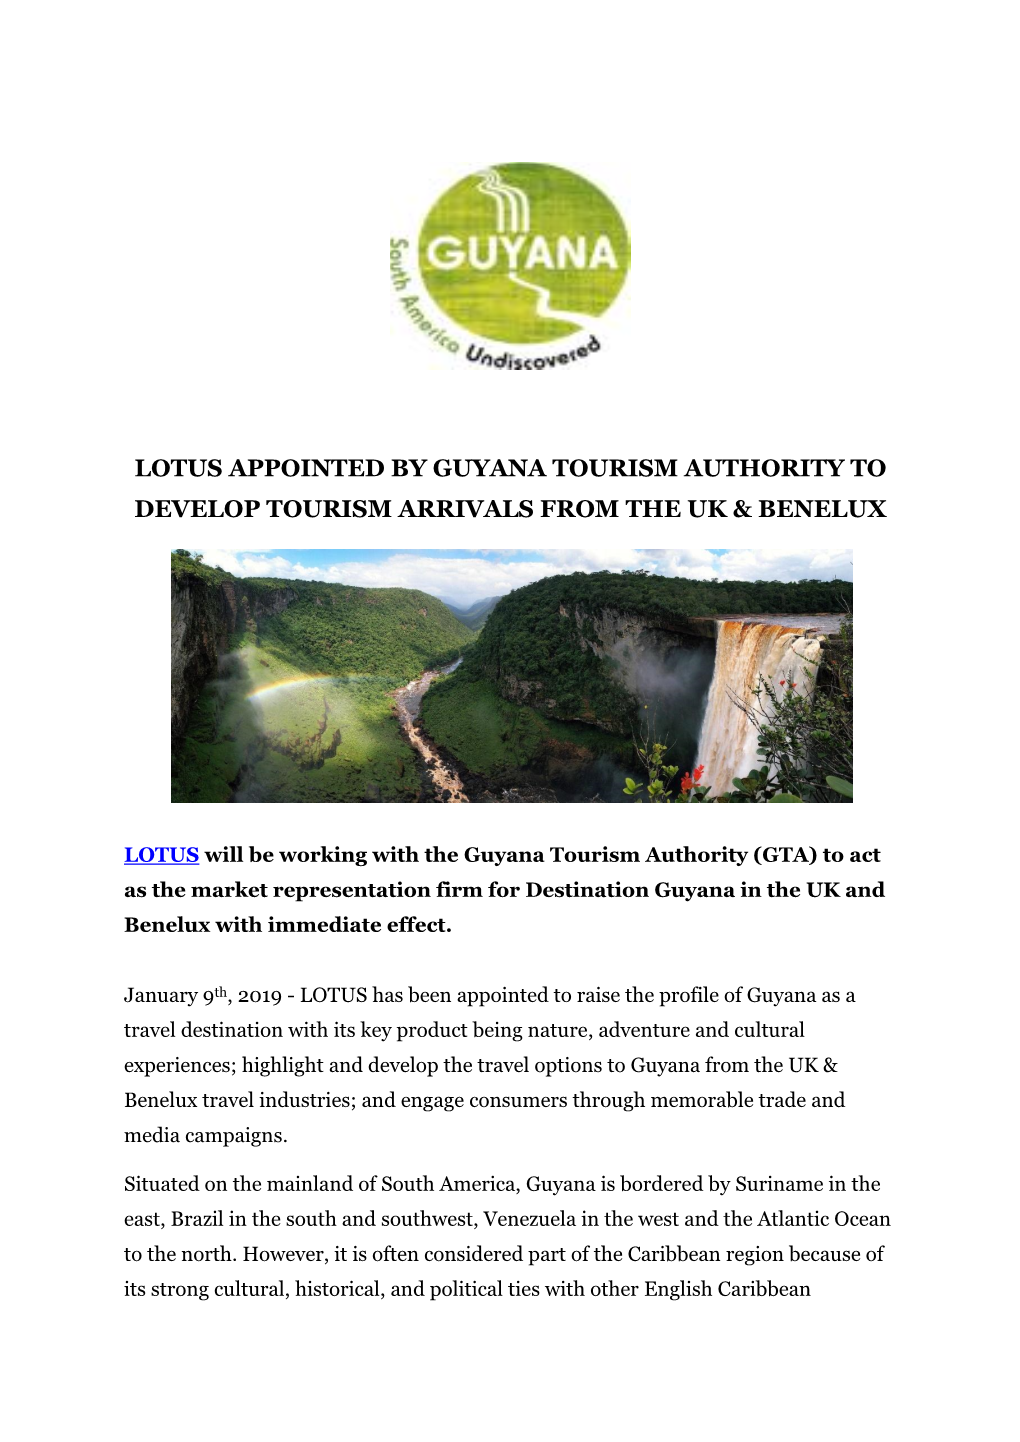 Lotus Appointed by Guyana Tourism Authority to Develop Tourism Arrivals from the Uk & Benelux